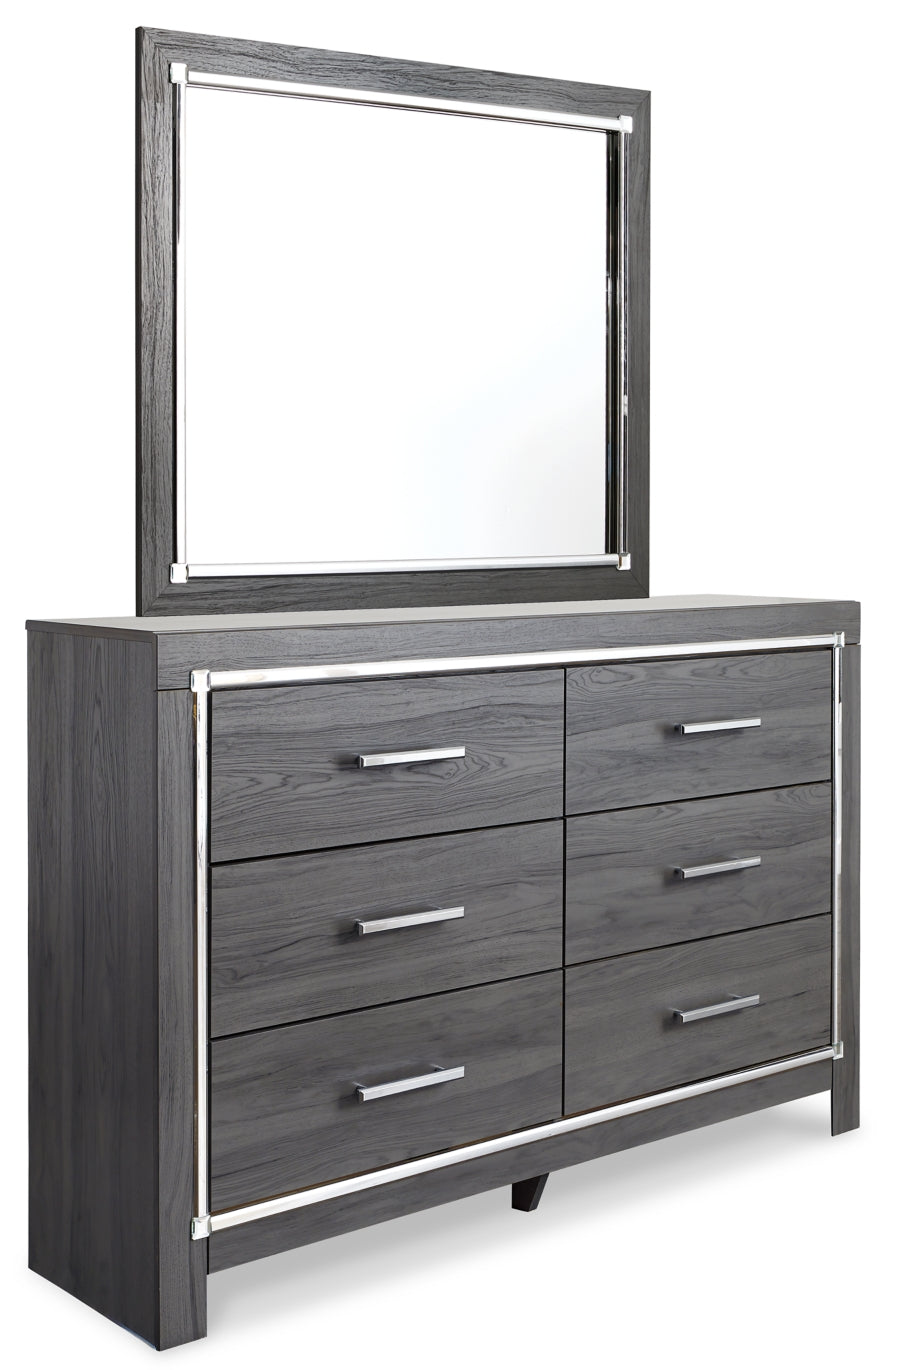 Lodanna King Panel Bed with 2 Storage Drawers with Mirrored Dresser - PKG003566 - furniture place usa